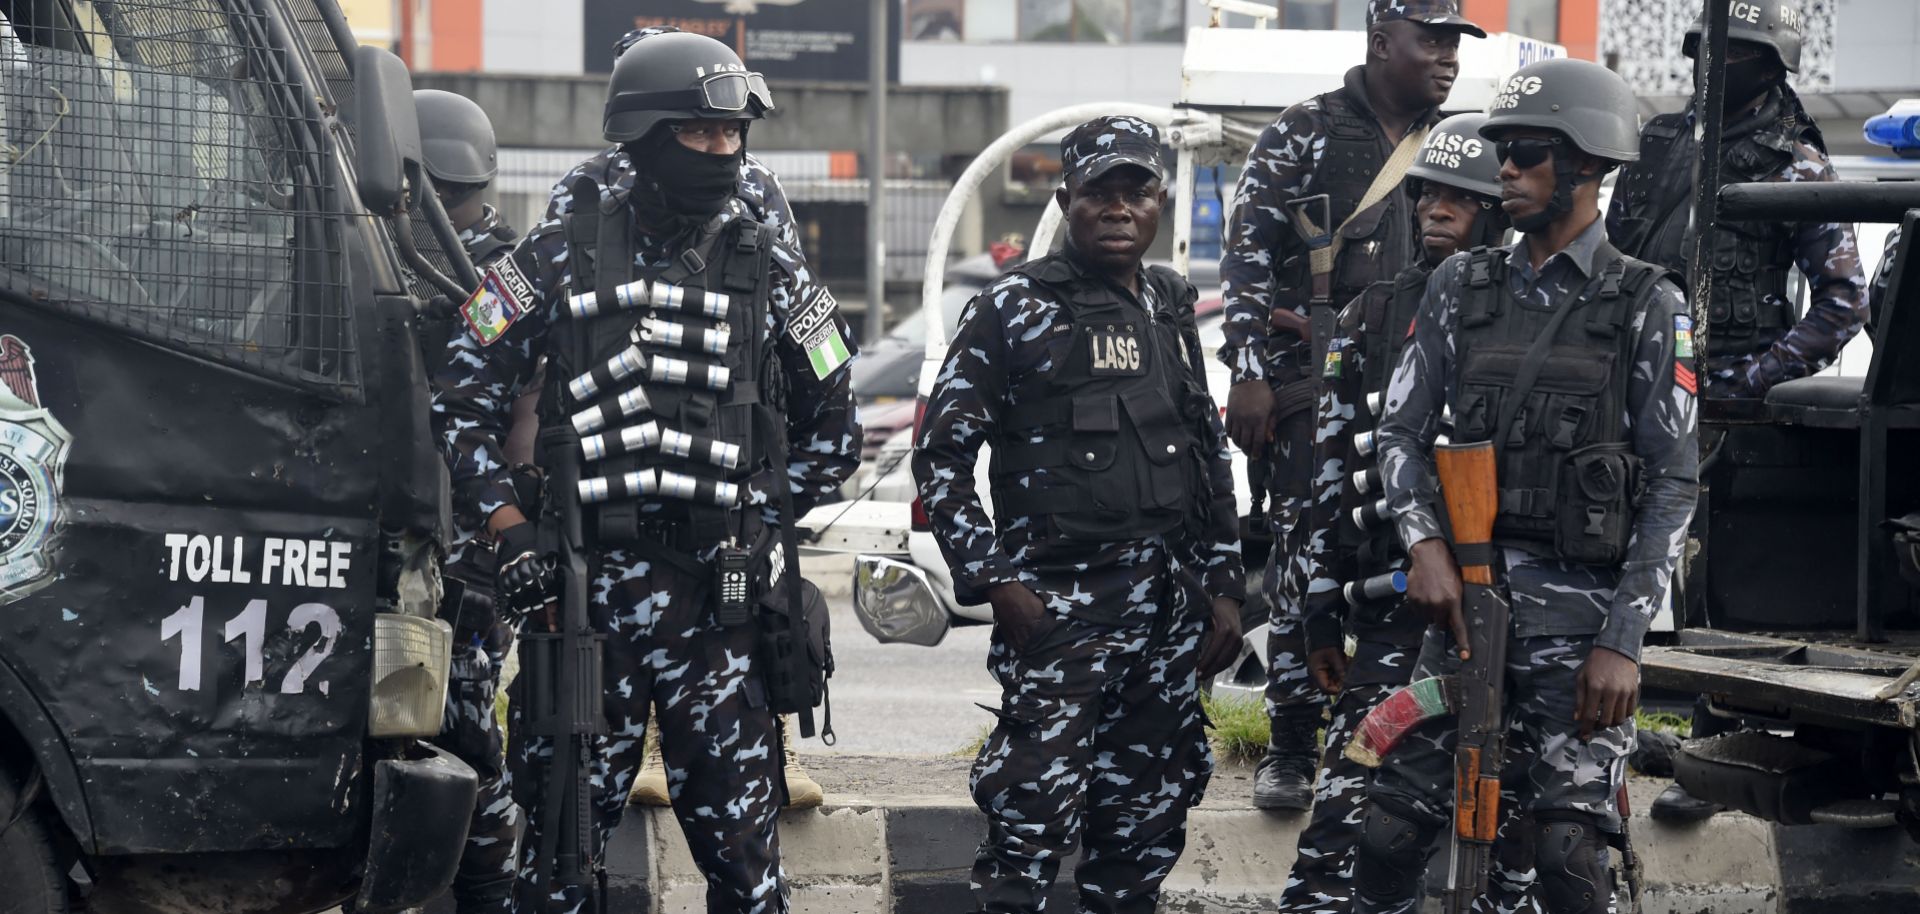 Police officers stand on a street in Lagos on Oct. 1, 2022, as supporters march to campaign for a third-party candidate running in Nigeria's 2023 presidential election.